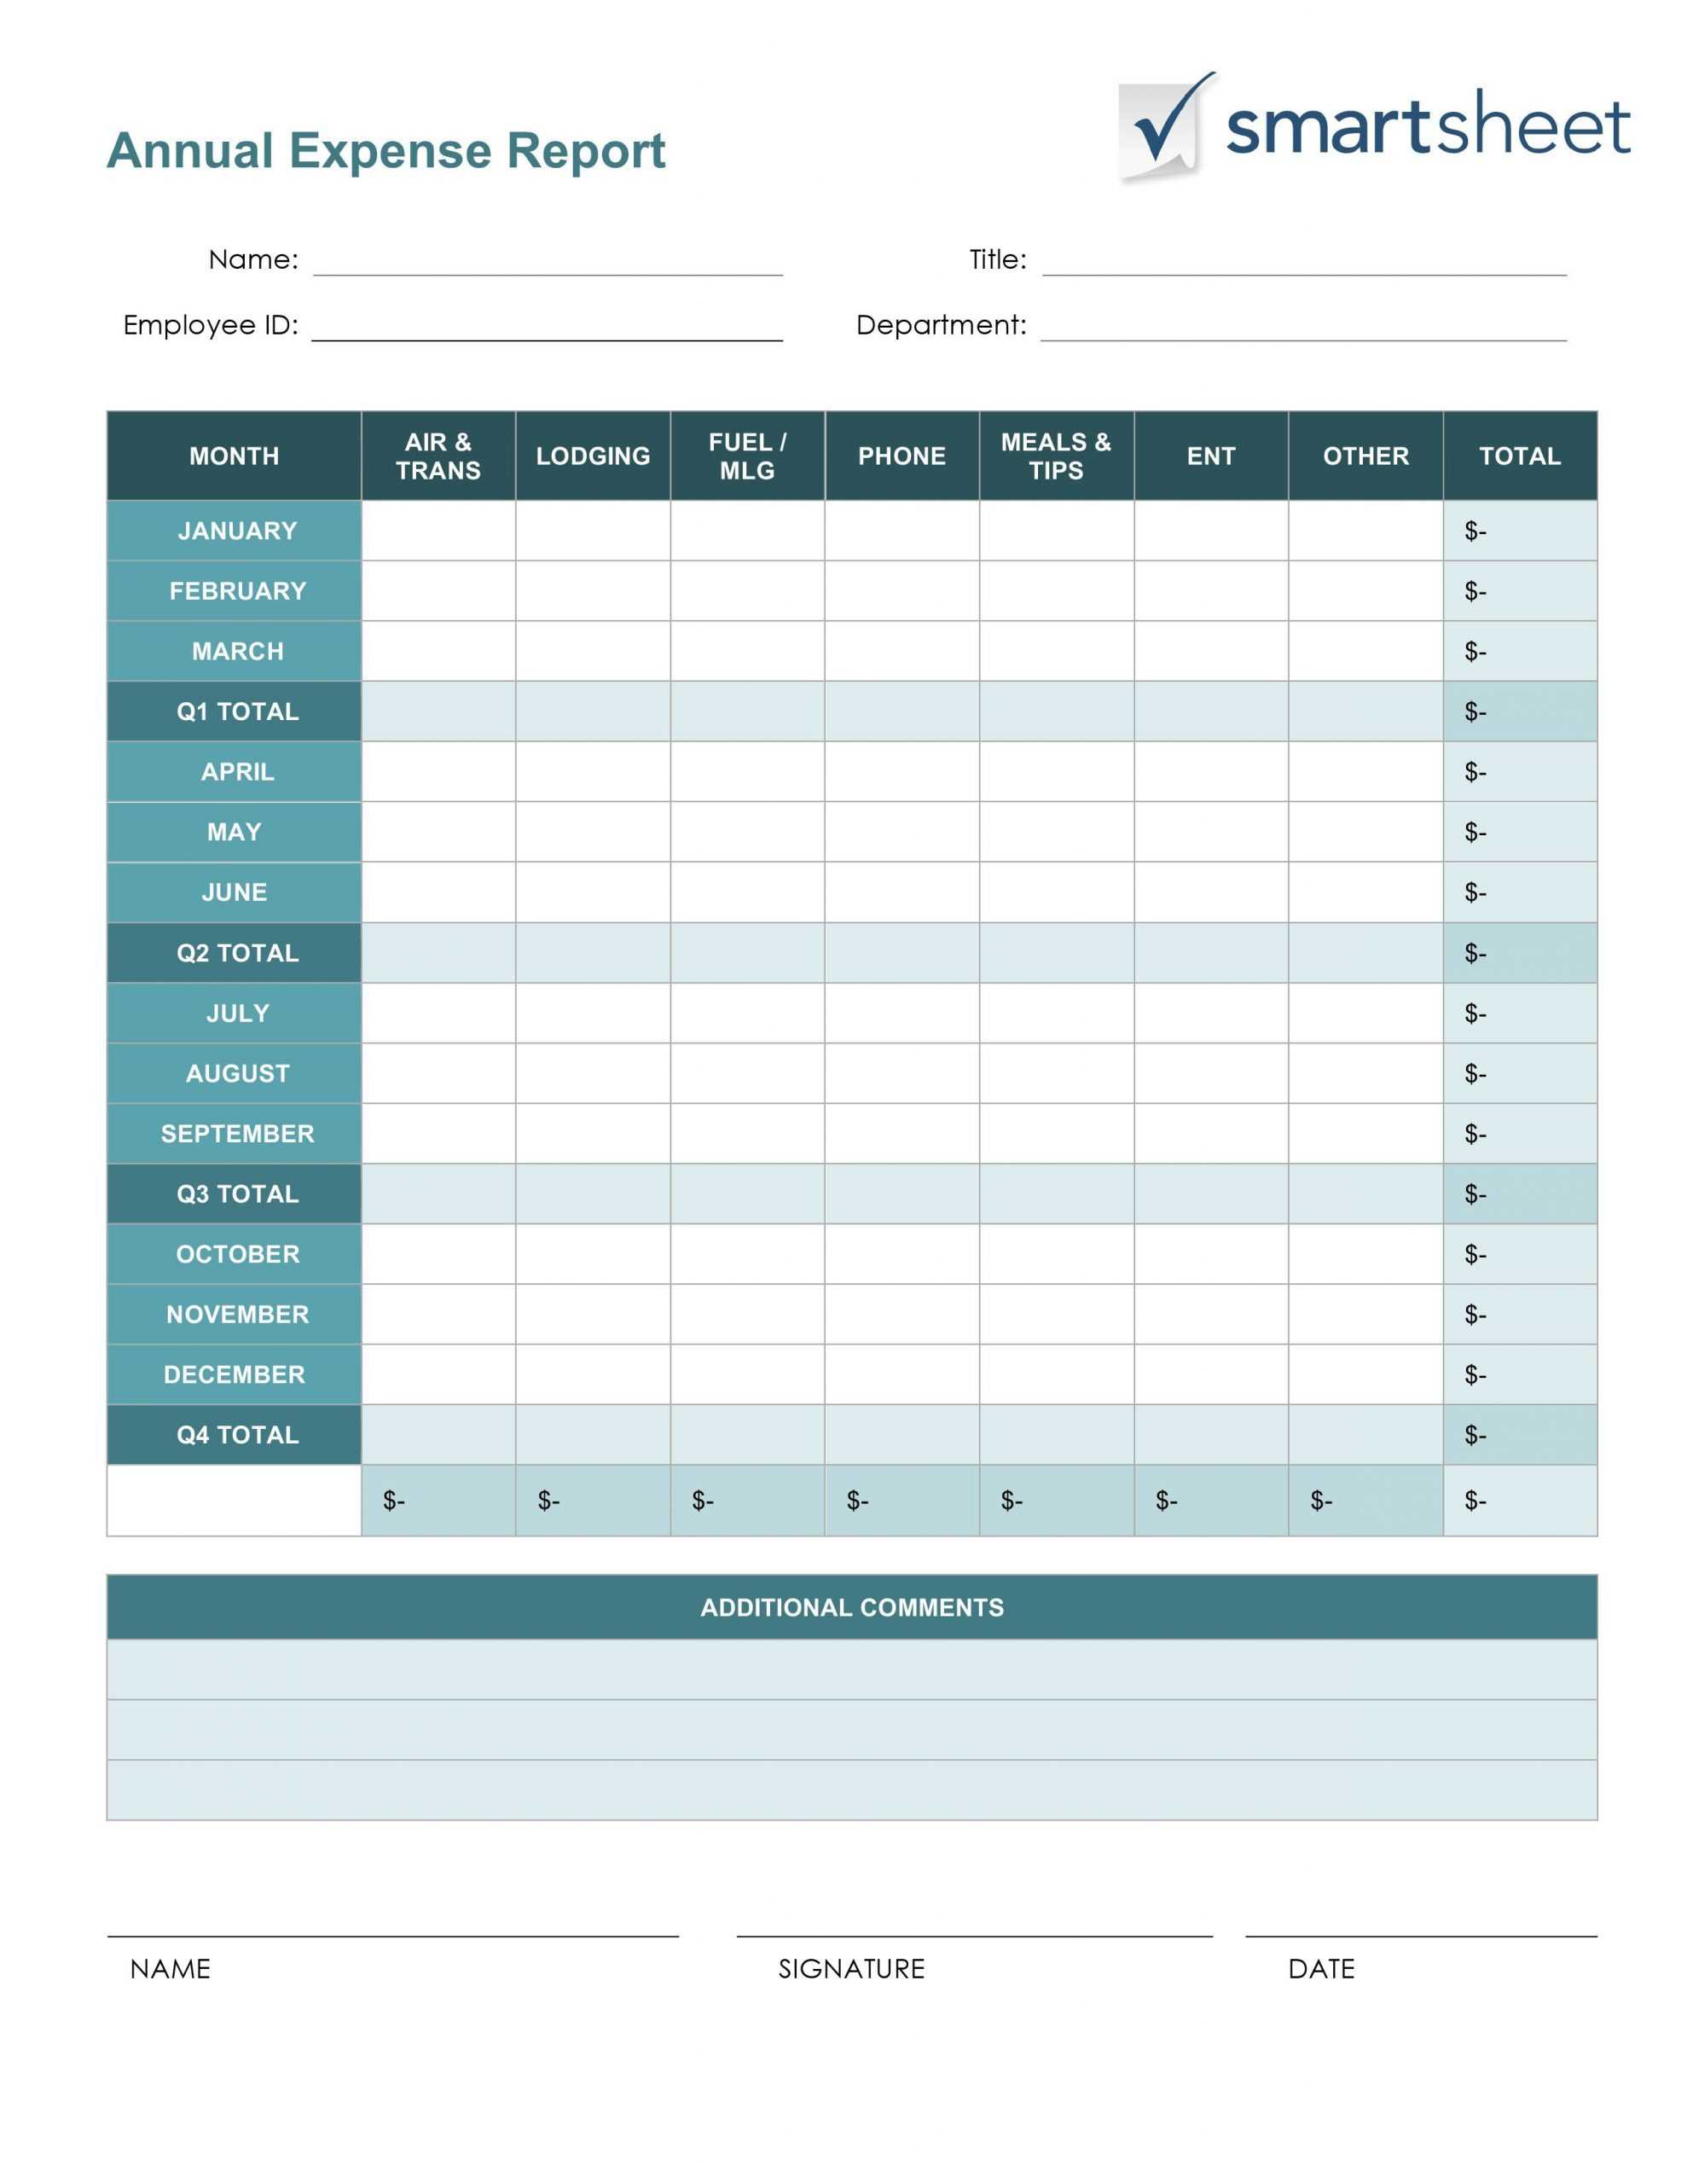 Monthly Income Report Format Annual Personal Statement Inside Quarterly Expense Report Template